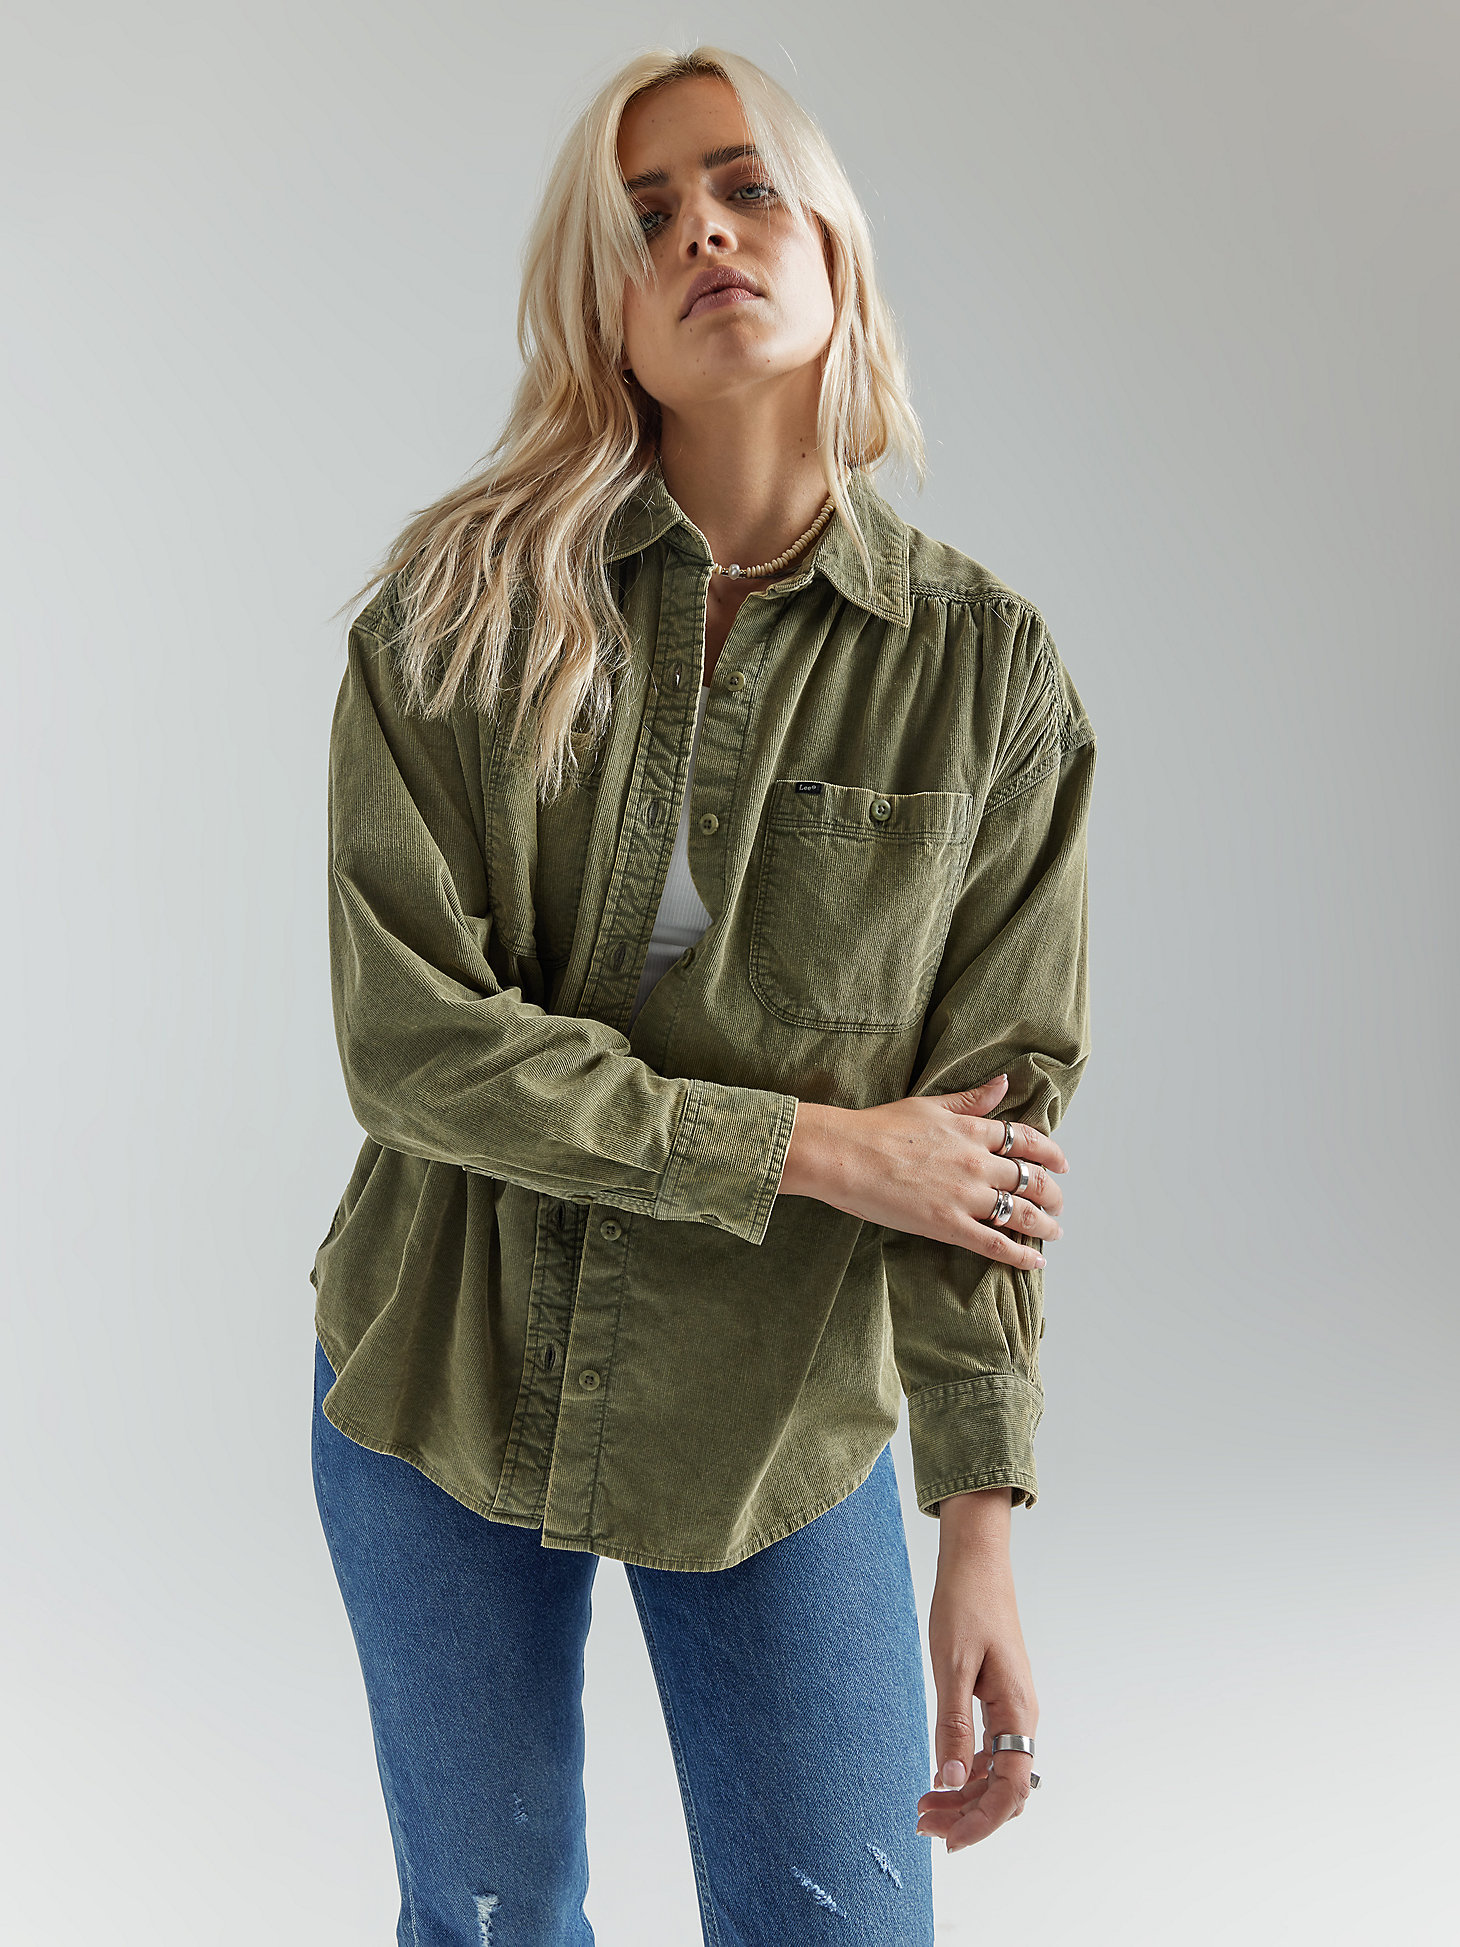 Women's Frontier Shirred Corduroy Button Down Shirt in Olive Grove alternative view 4